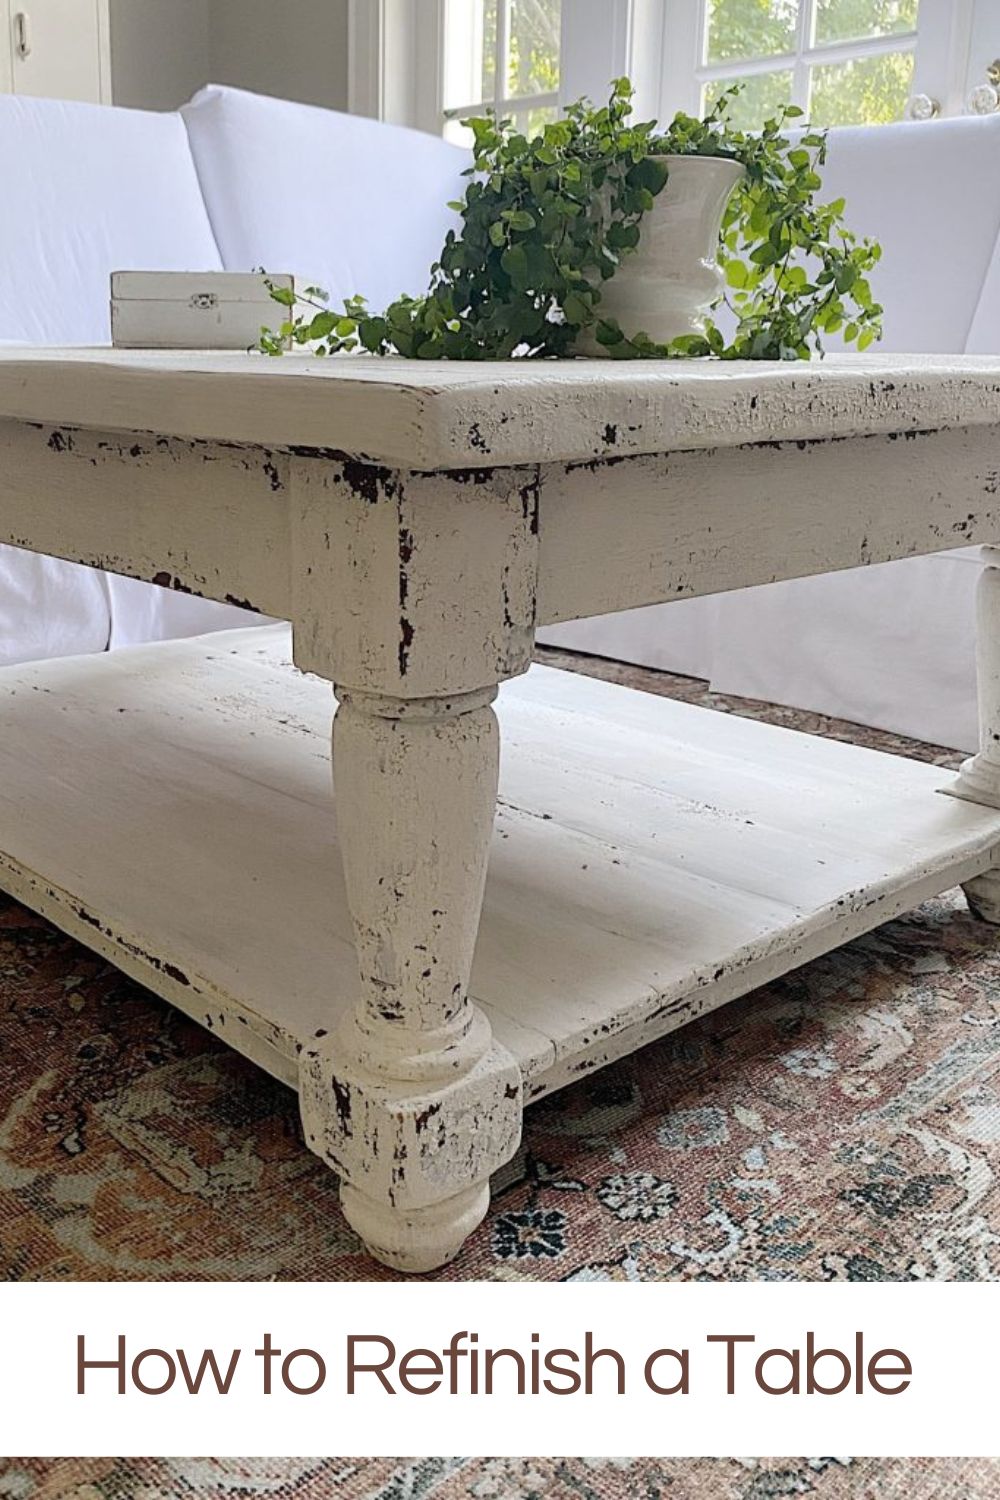 Our family has a long history with this coffee table. Today I am excited to share how to refinish a table while maintaining its character.